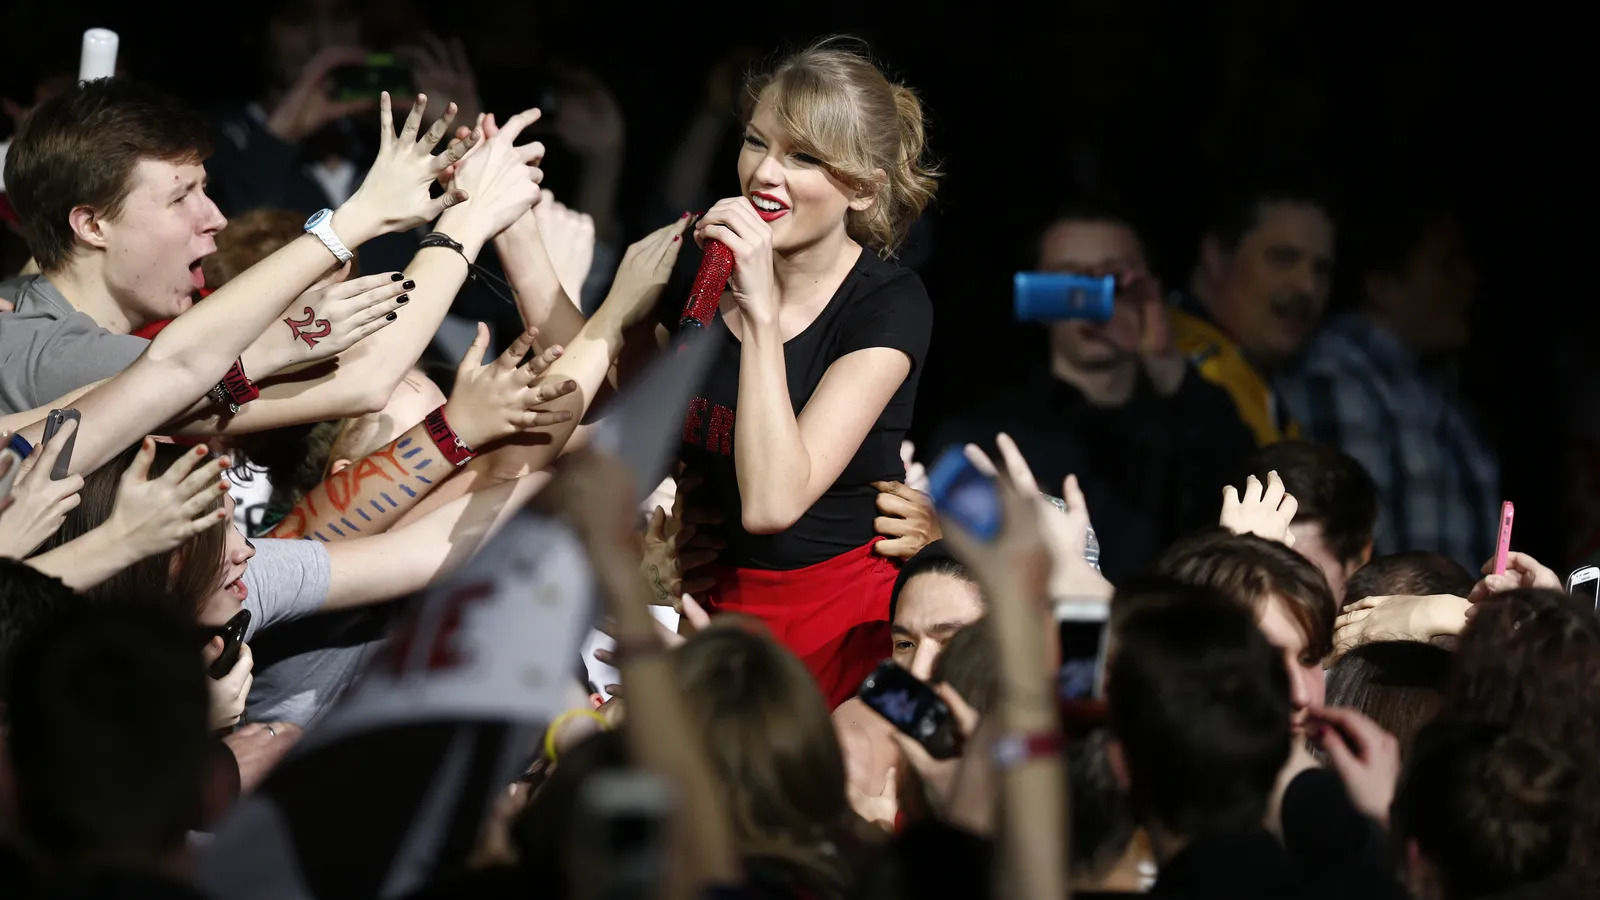 Taylor Swift among Forbes' 'The World's Most Powerful Women' list